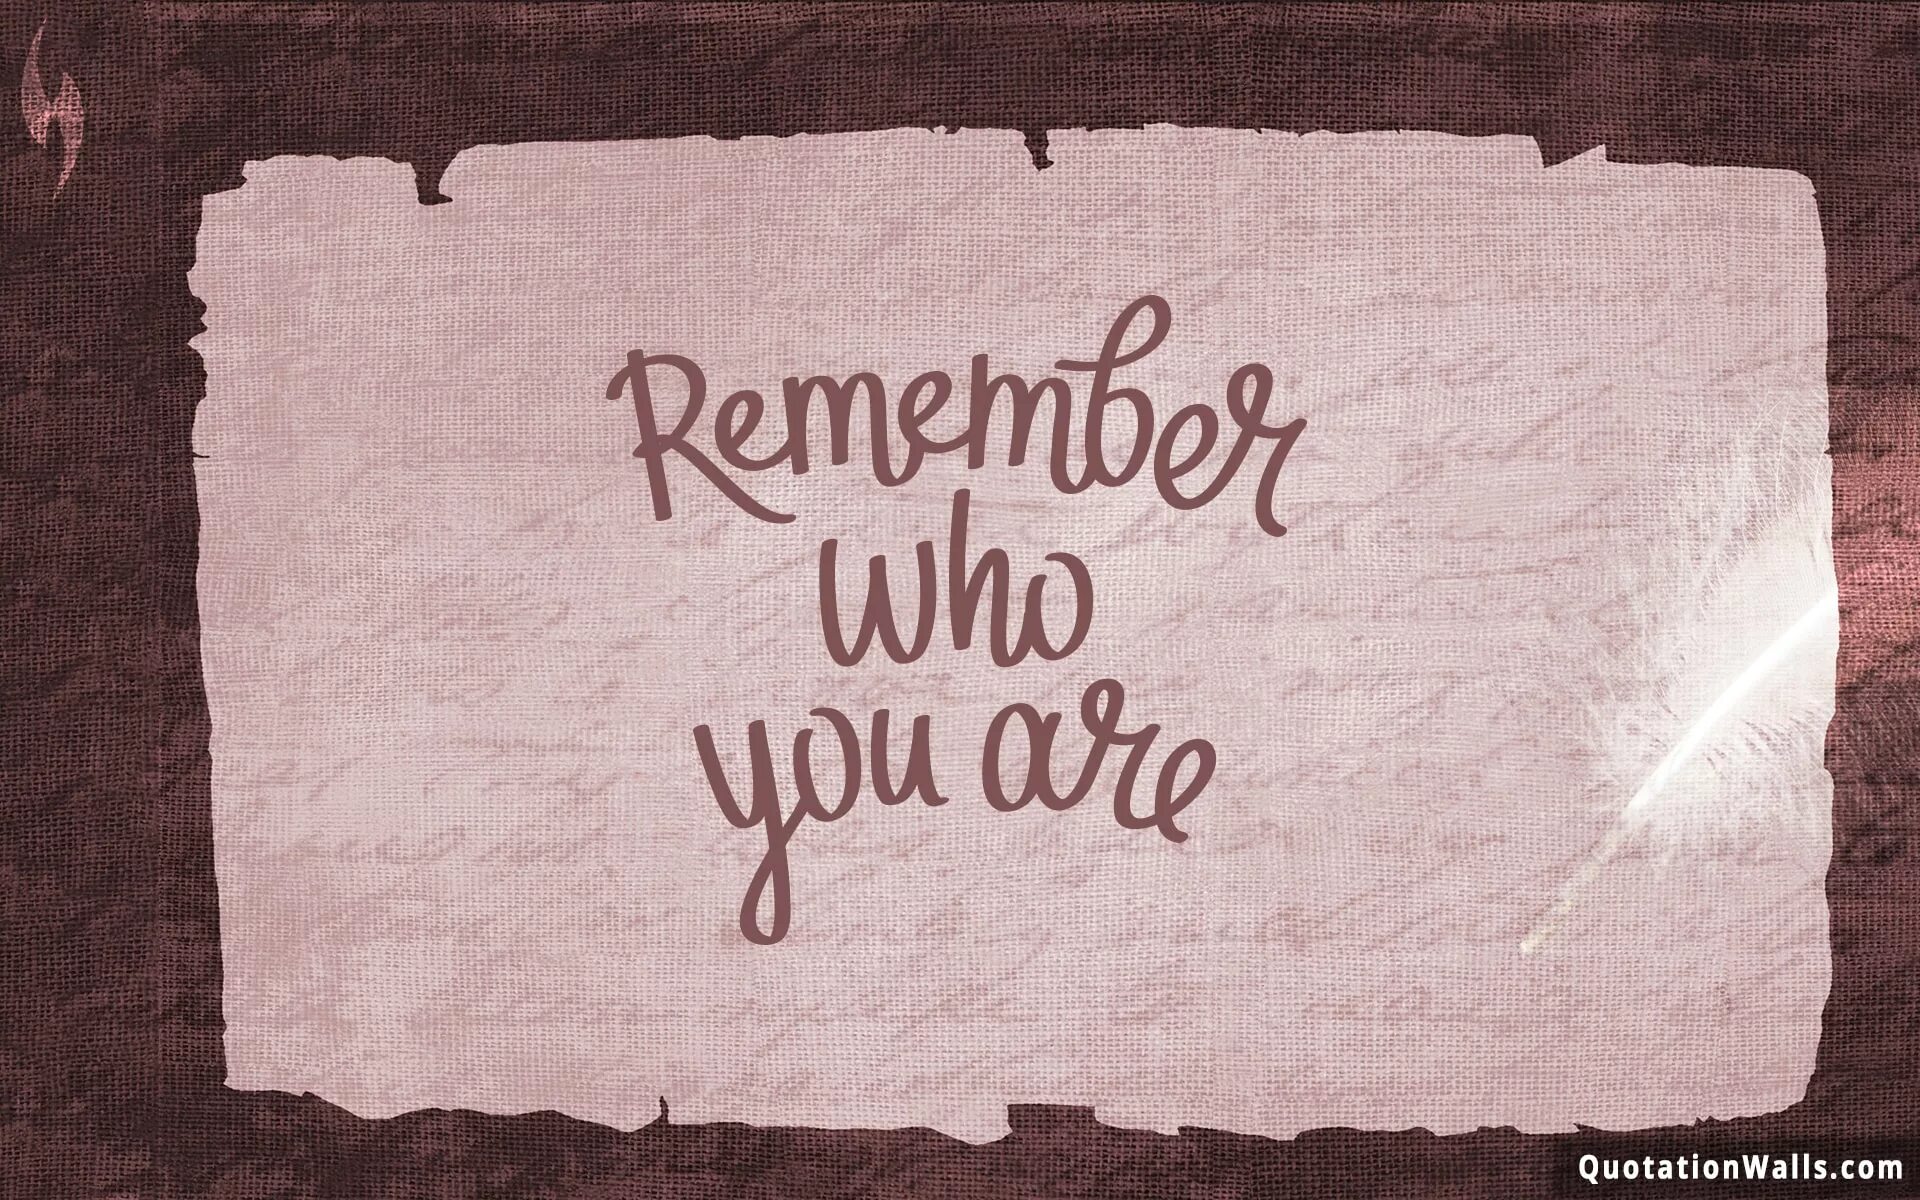 Remember you dominurmom. Remember who you are Wallpaper. Remember who you are обои. Ремембер ху ю а. Remember who you started.